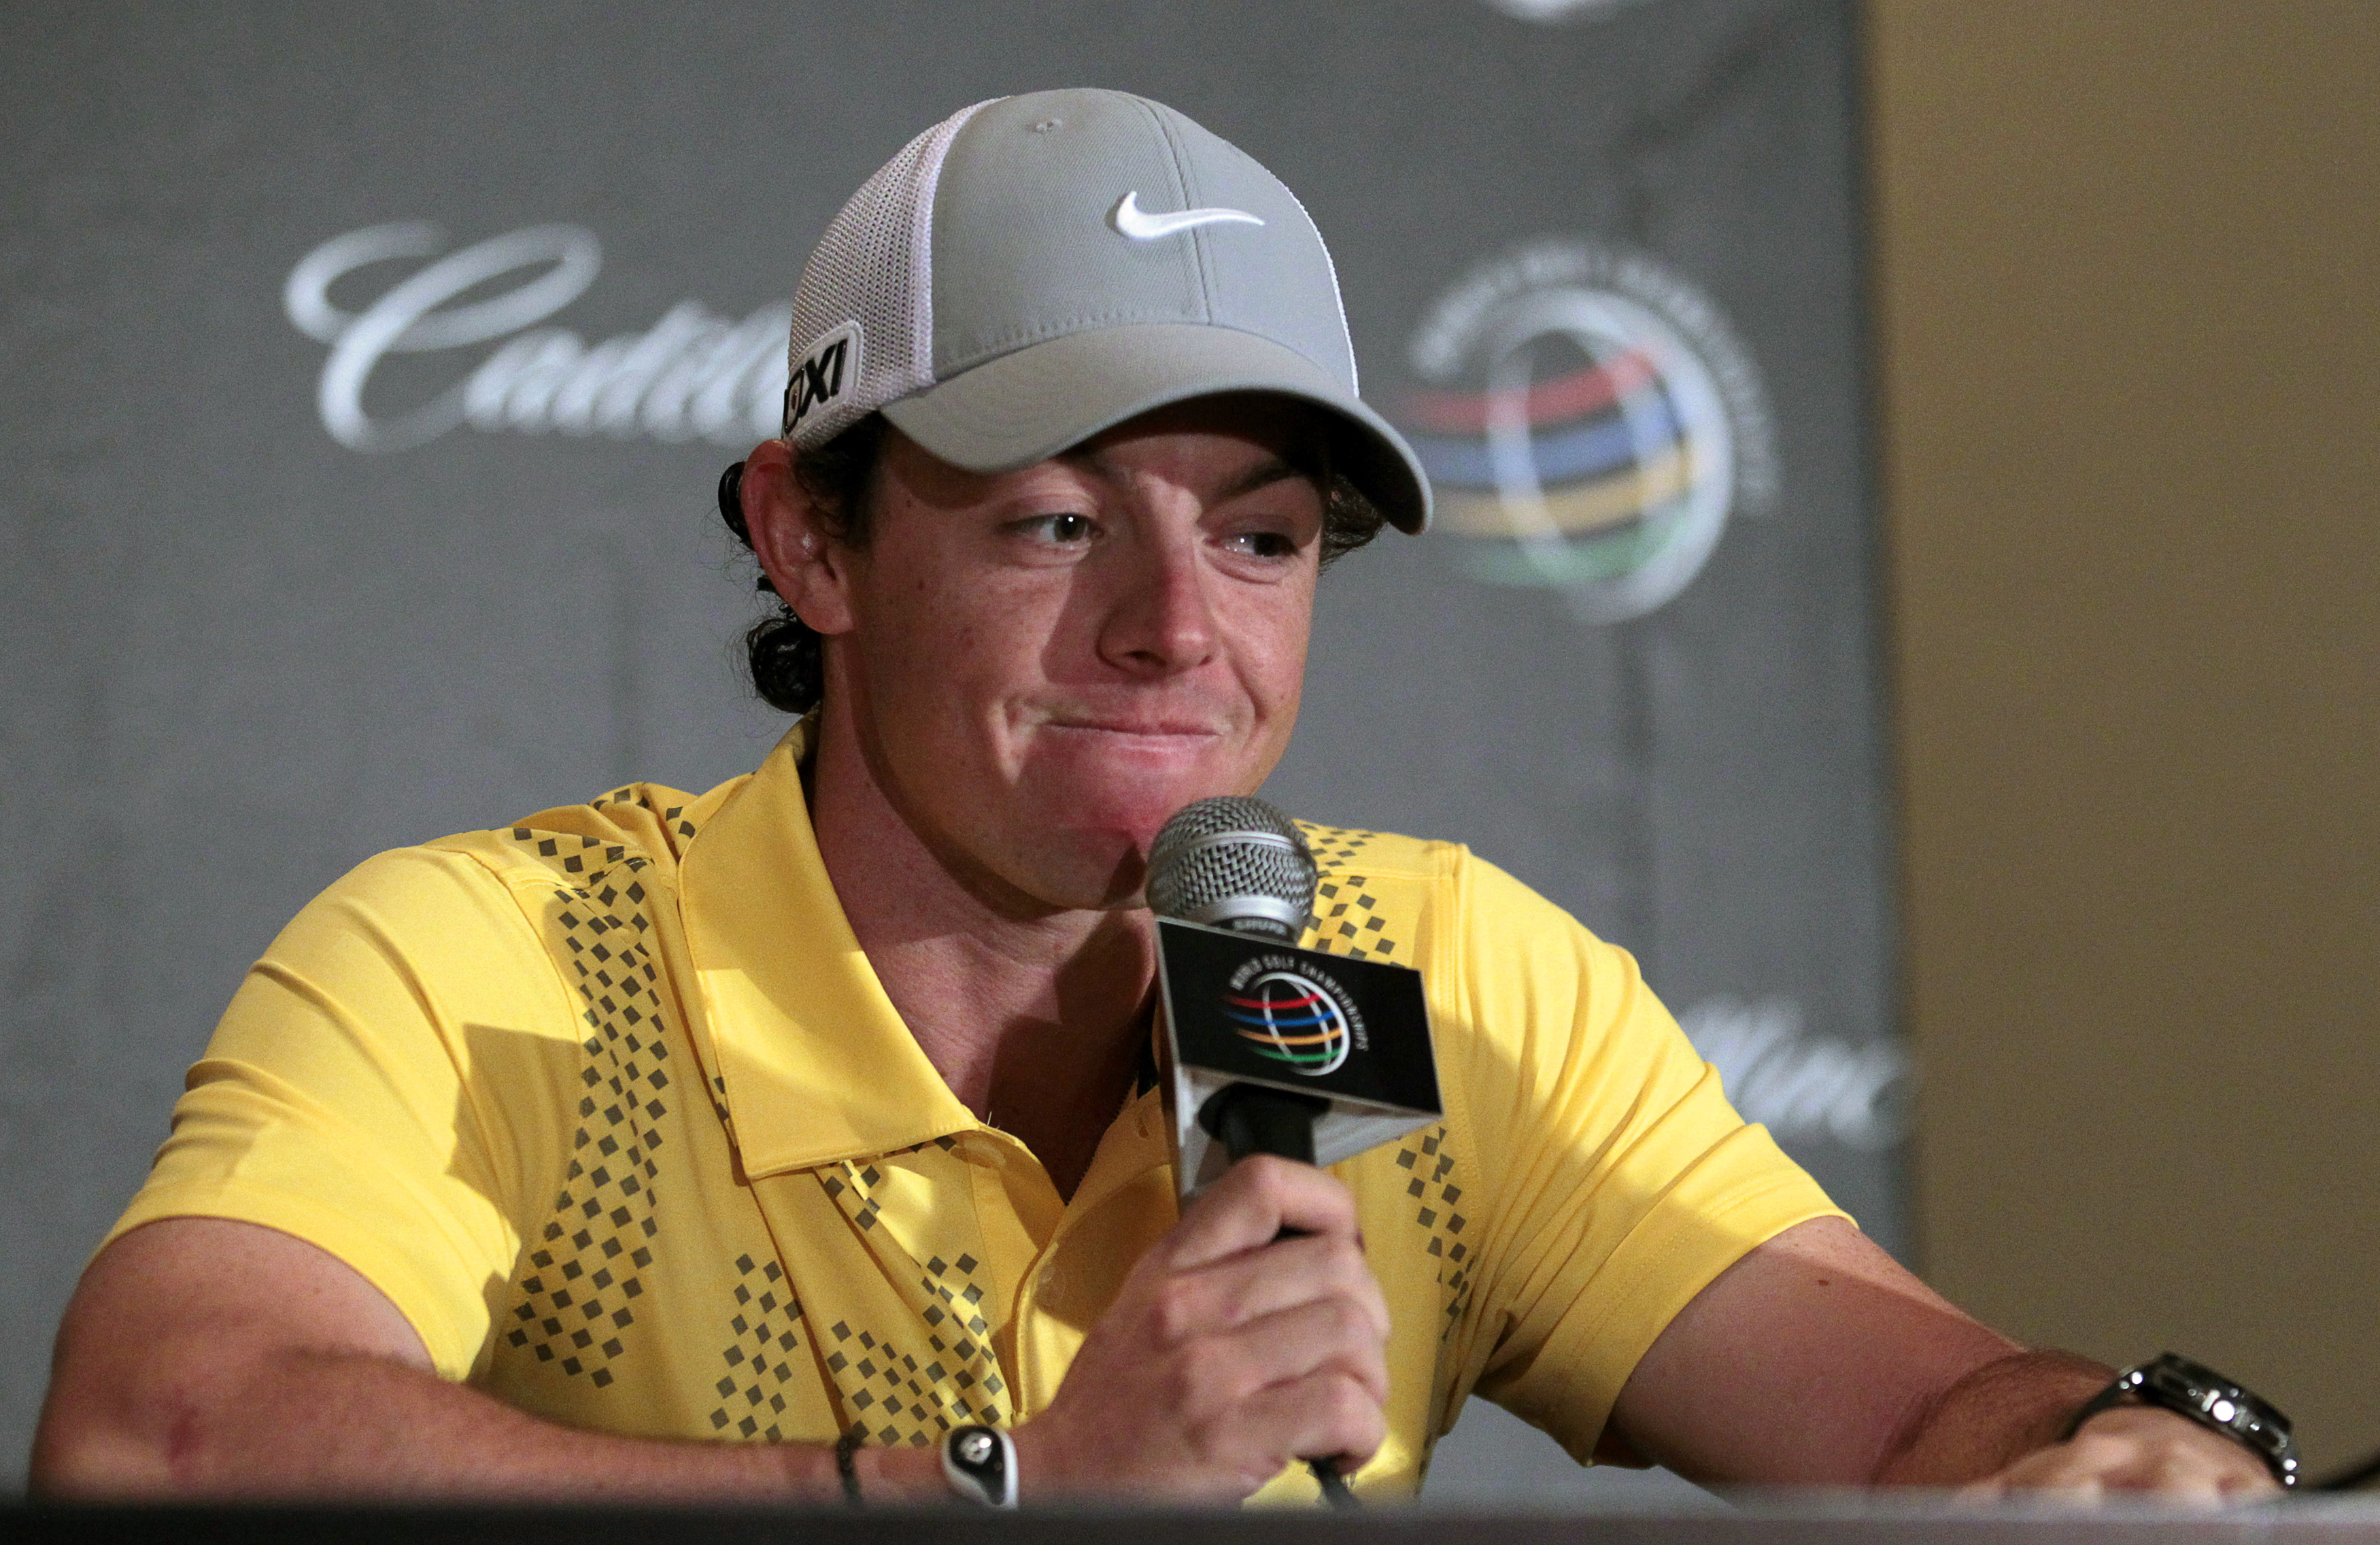 Northern Ireland's Rory McIlroy addresses a news conference during a practice day for the WGC-Cadillac Championship PGA golf tournament in Doral